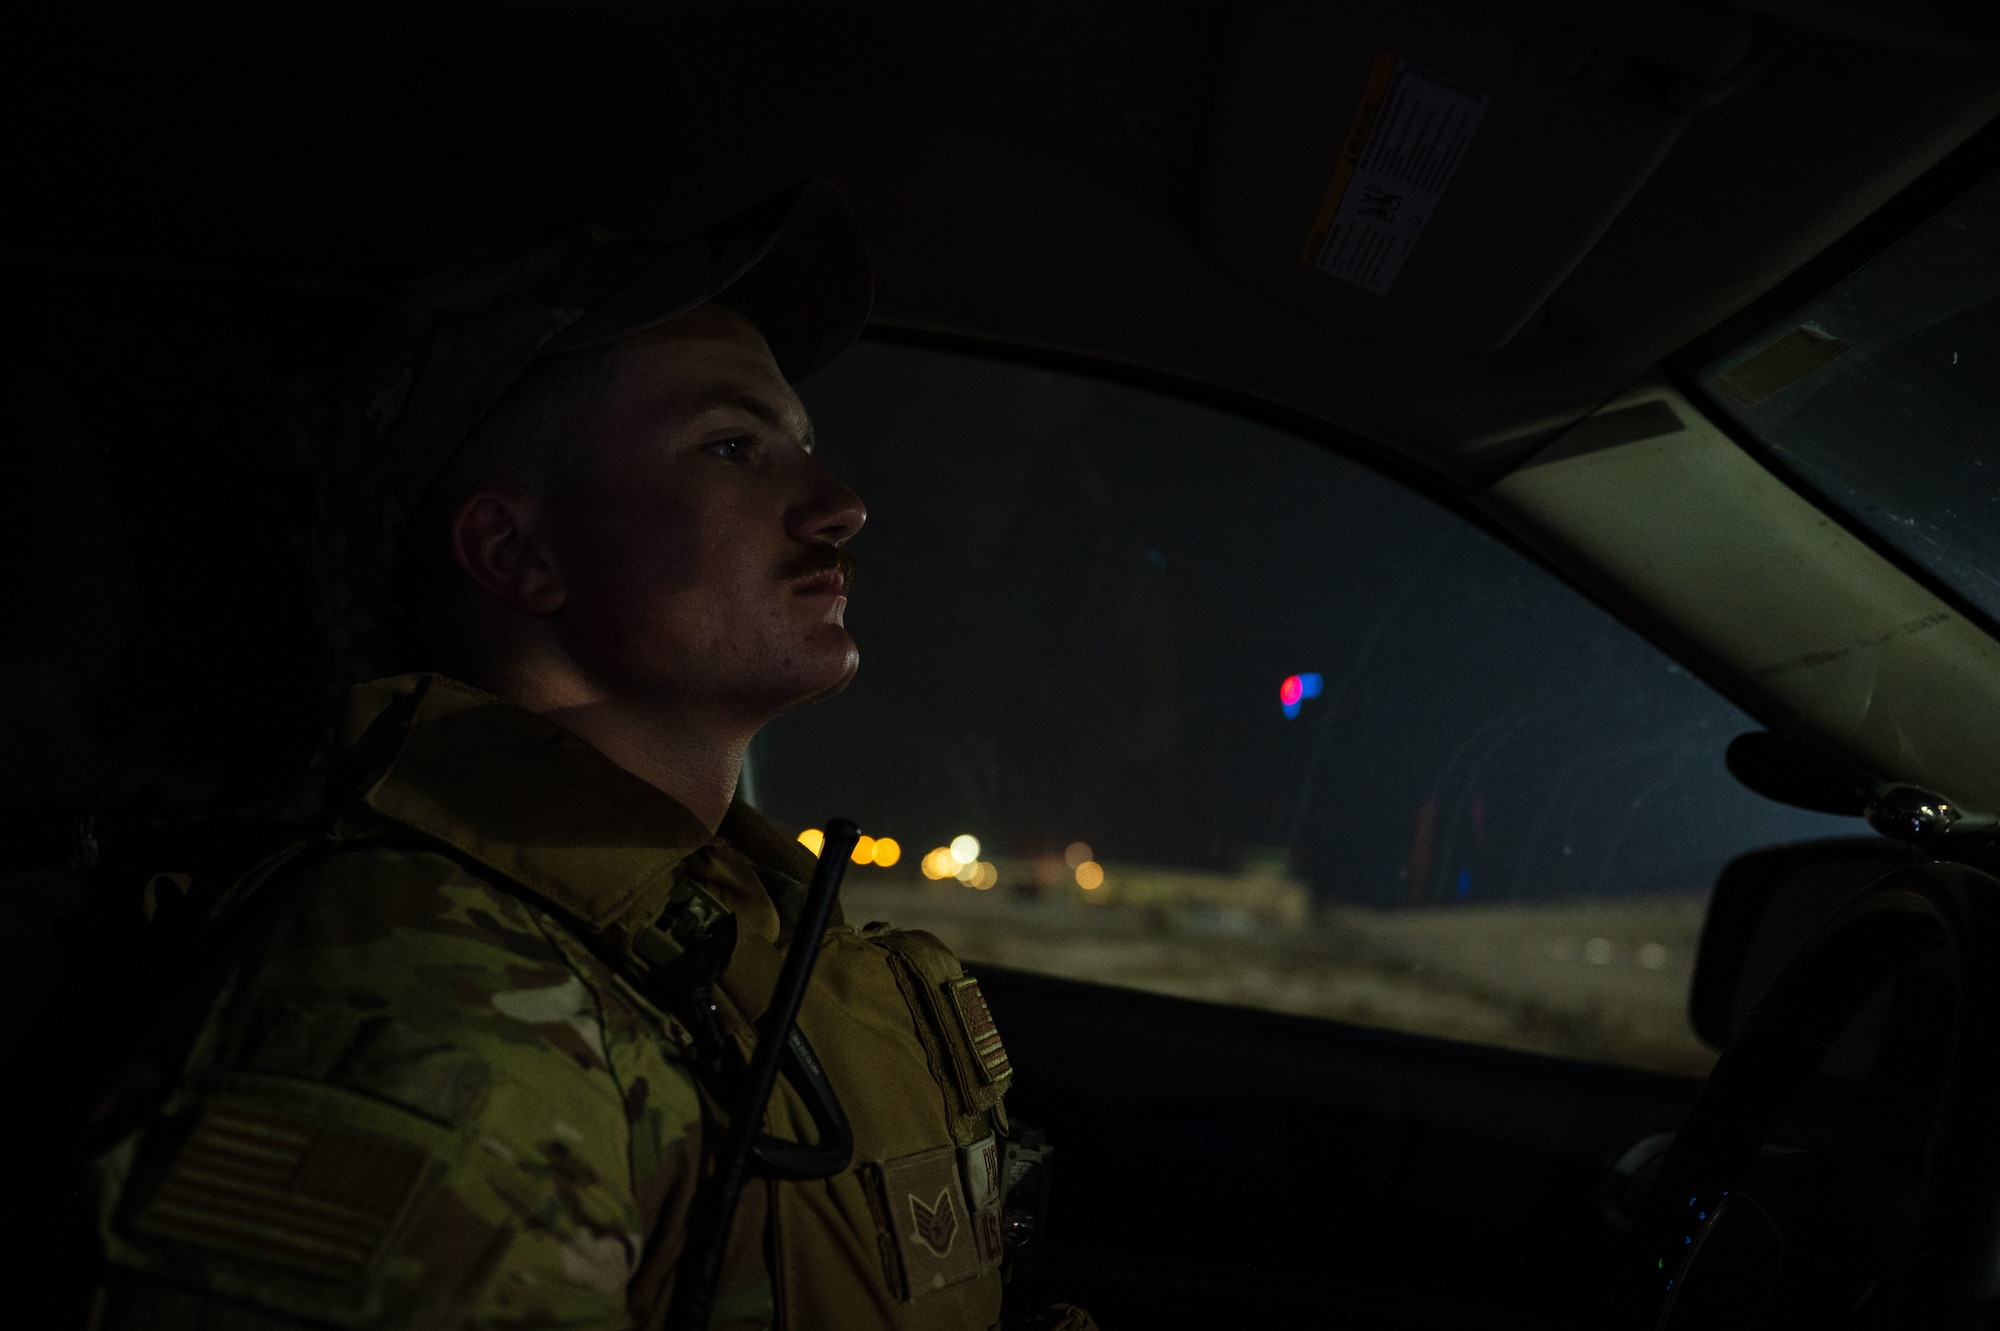 U.S. Air Force Staff Sgt. Justin Pickens, a military working dog handler with the 379th Expeditionary Security Forces Squadron, drives out to patrol a section of the base perimeter with his MWD, Aug. 10, 2022 at Al Udeid Air Base, Qatar. Pickens’ patrol helped ensure there were no detectable threats on the perimeter. (U.S. Air Force photo by Staff Sgt. Dana Tourtellotte)